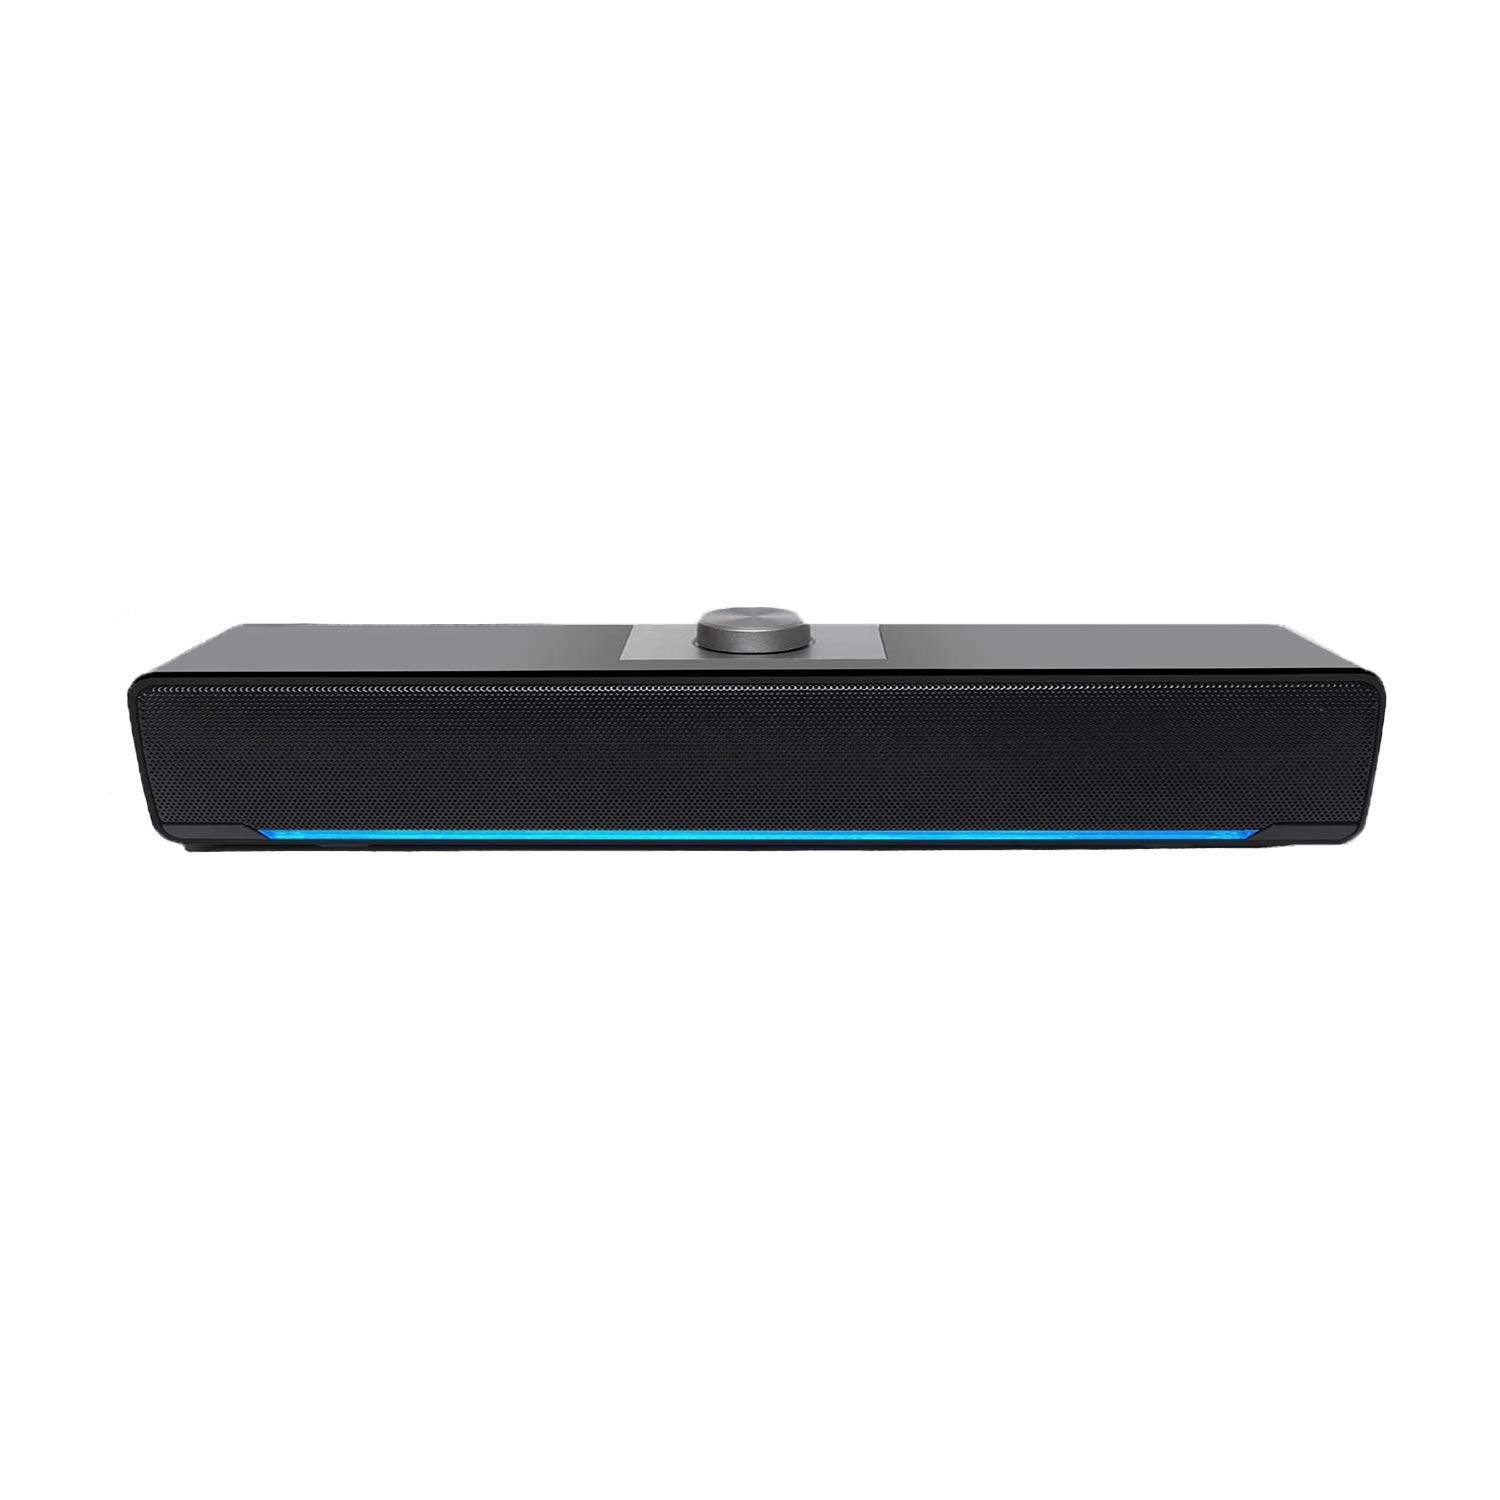 PC Computer Speaker, Wired Sound Bar, 2.0 Stereo USB Powered Soundbar Speaker. with Blue LED Light and 3.5 mm Aux Connection for PC, Desktop, Laptop, Tablet, MP3 and Cellphone